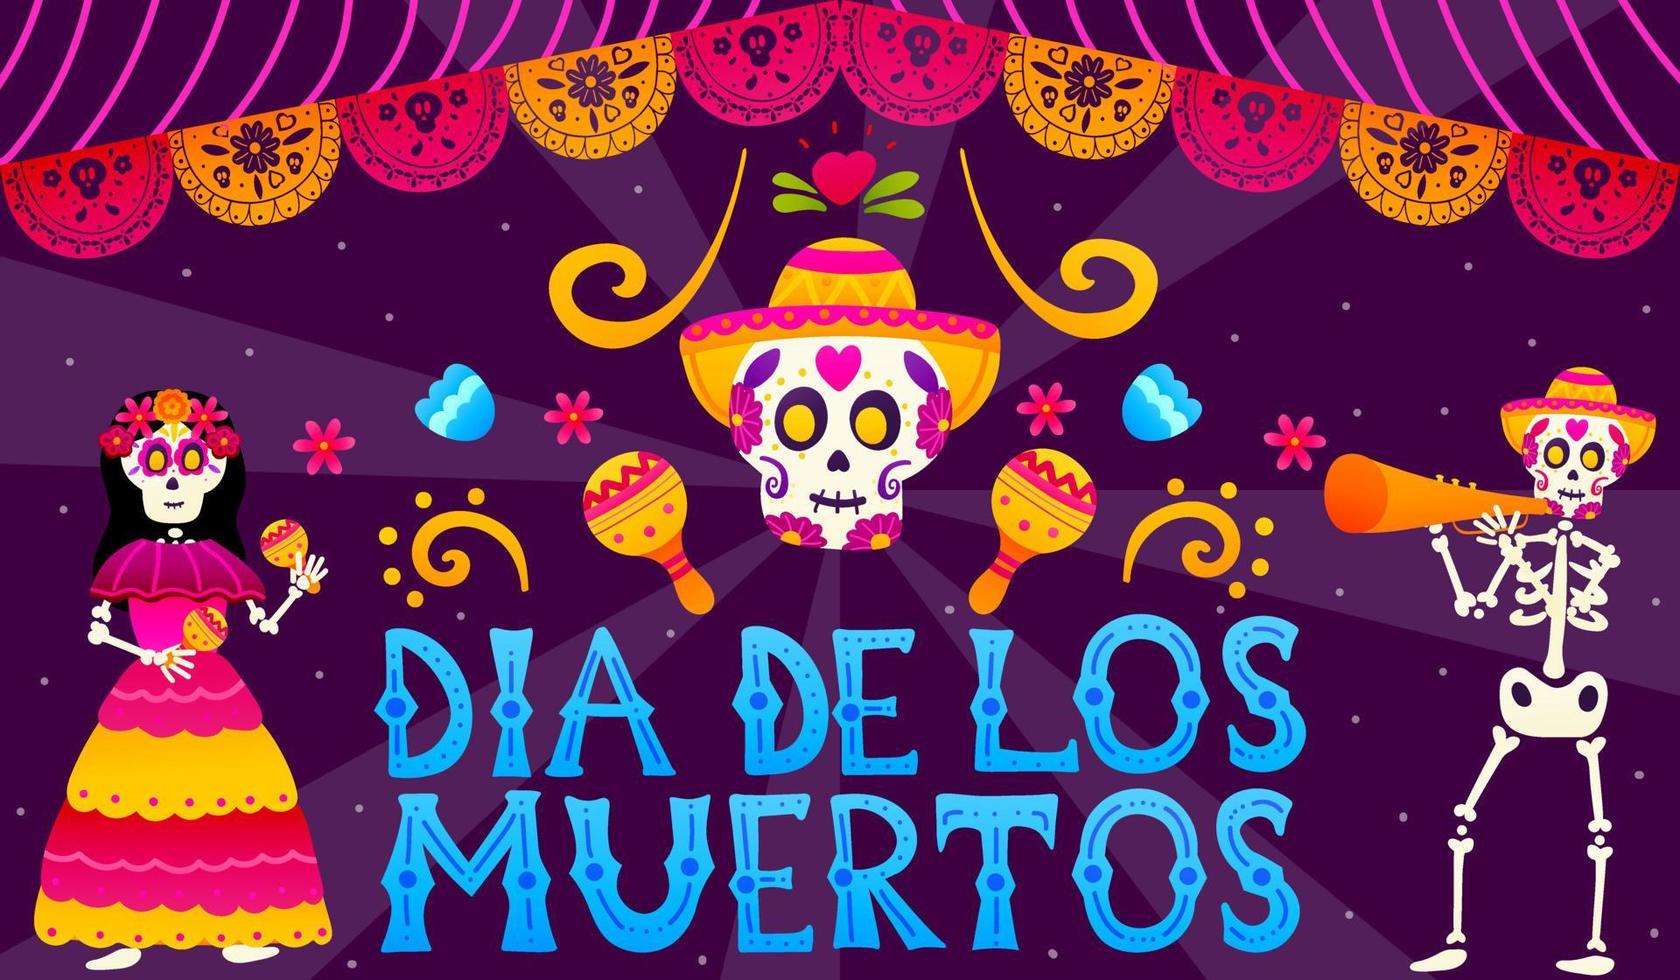 Dia de los muertos banner in cartoon style with dancing skulls and colourful lettering, floral ornate for day of the dead, greeting card for festival vector